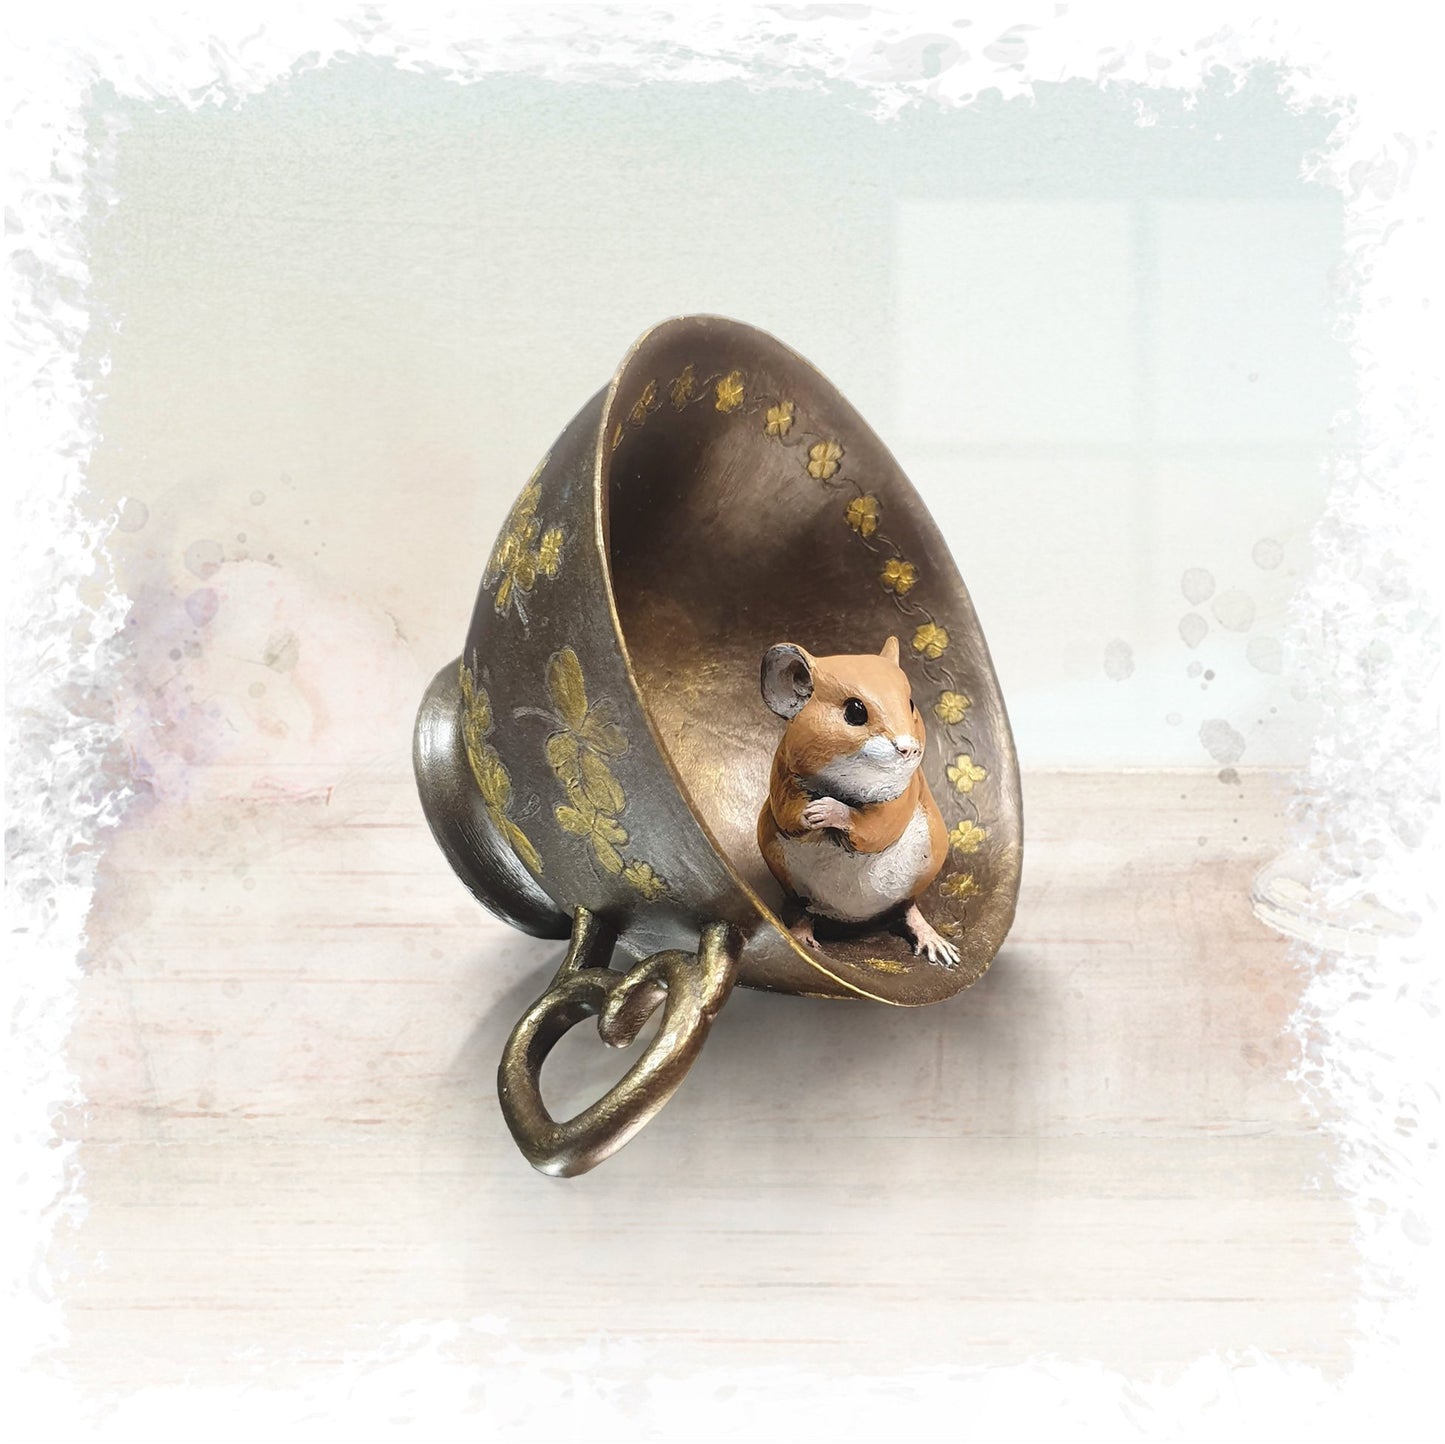 Mouse in Teacup Bronze Figurine by Michael Simpson (Richard Cooper)